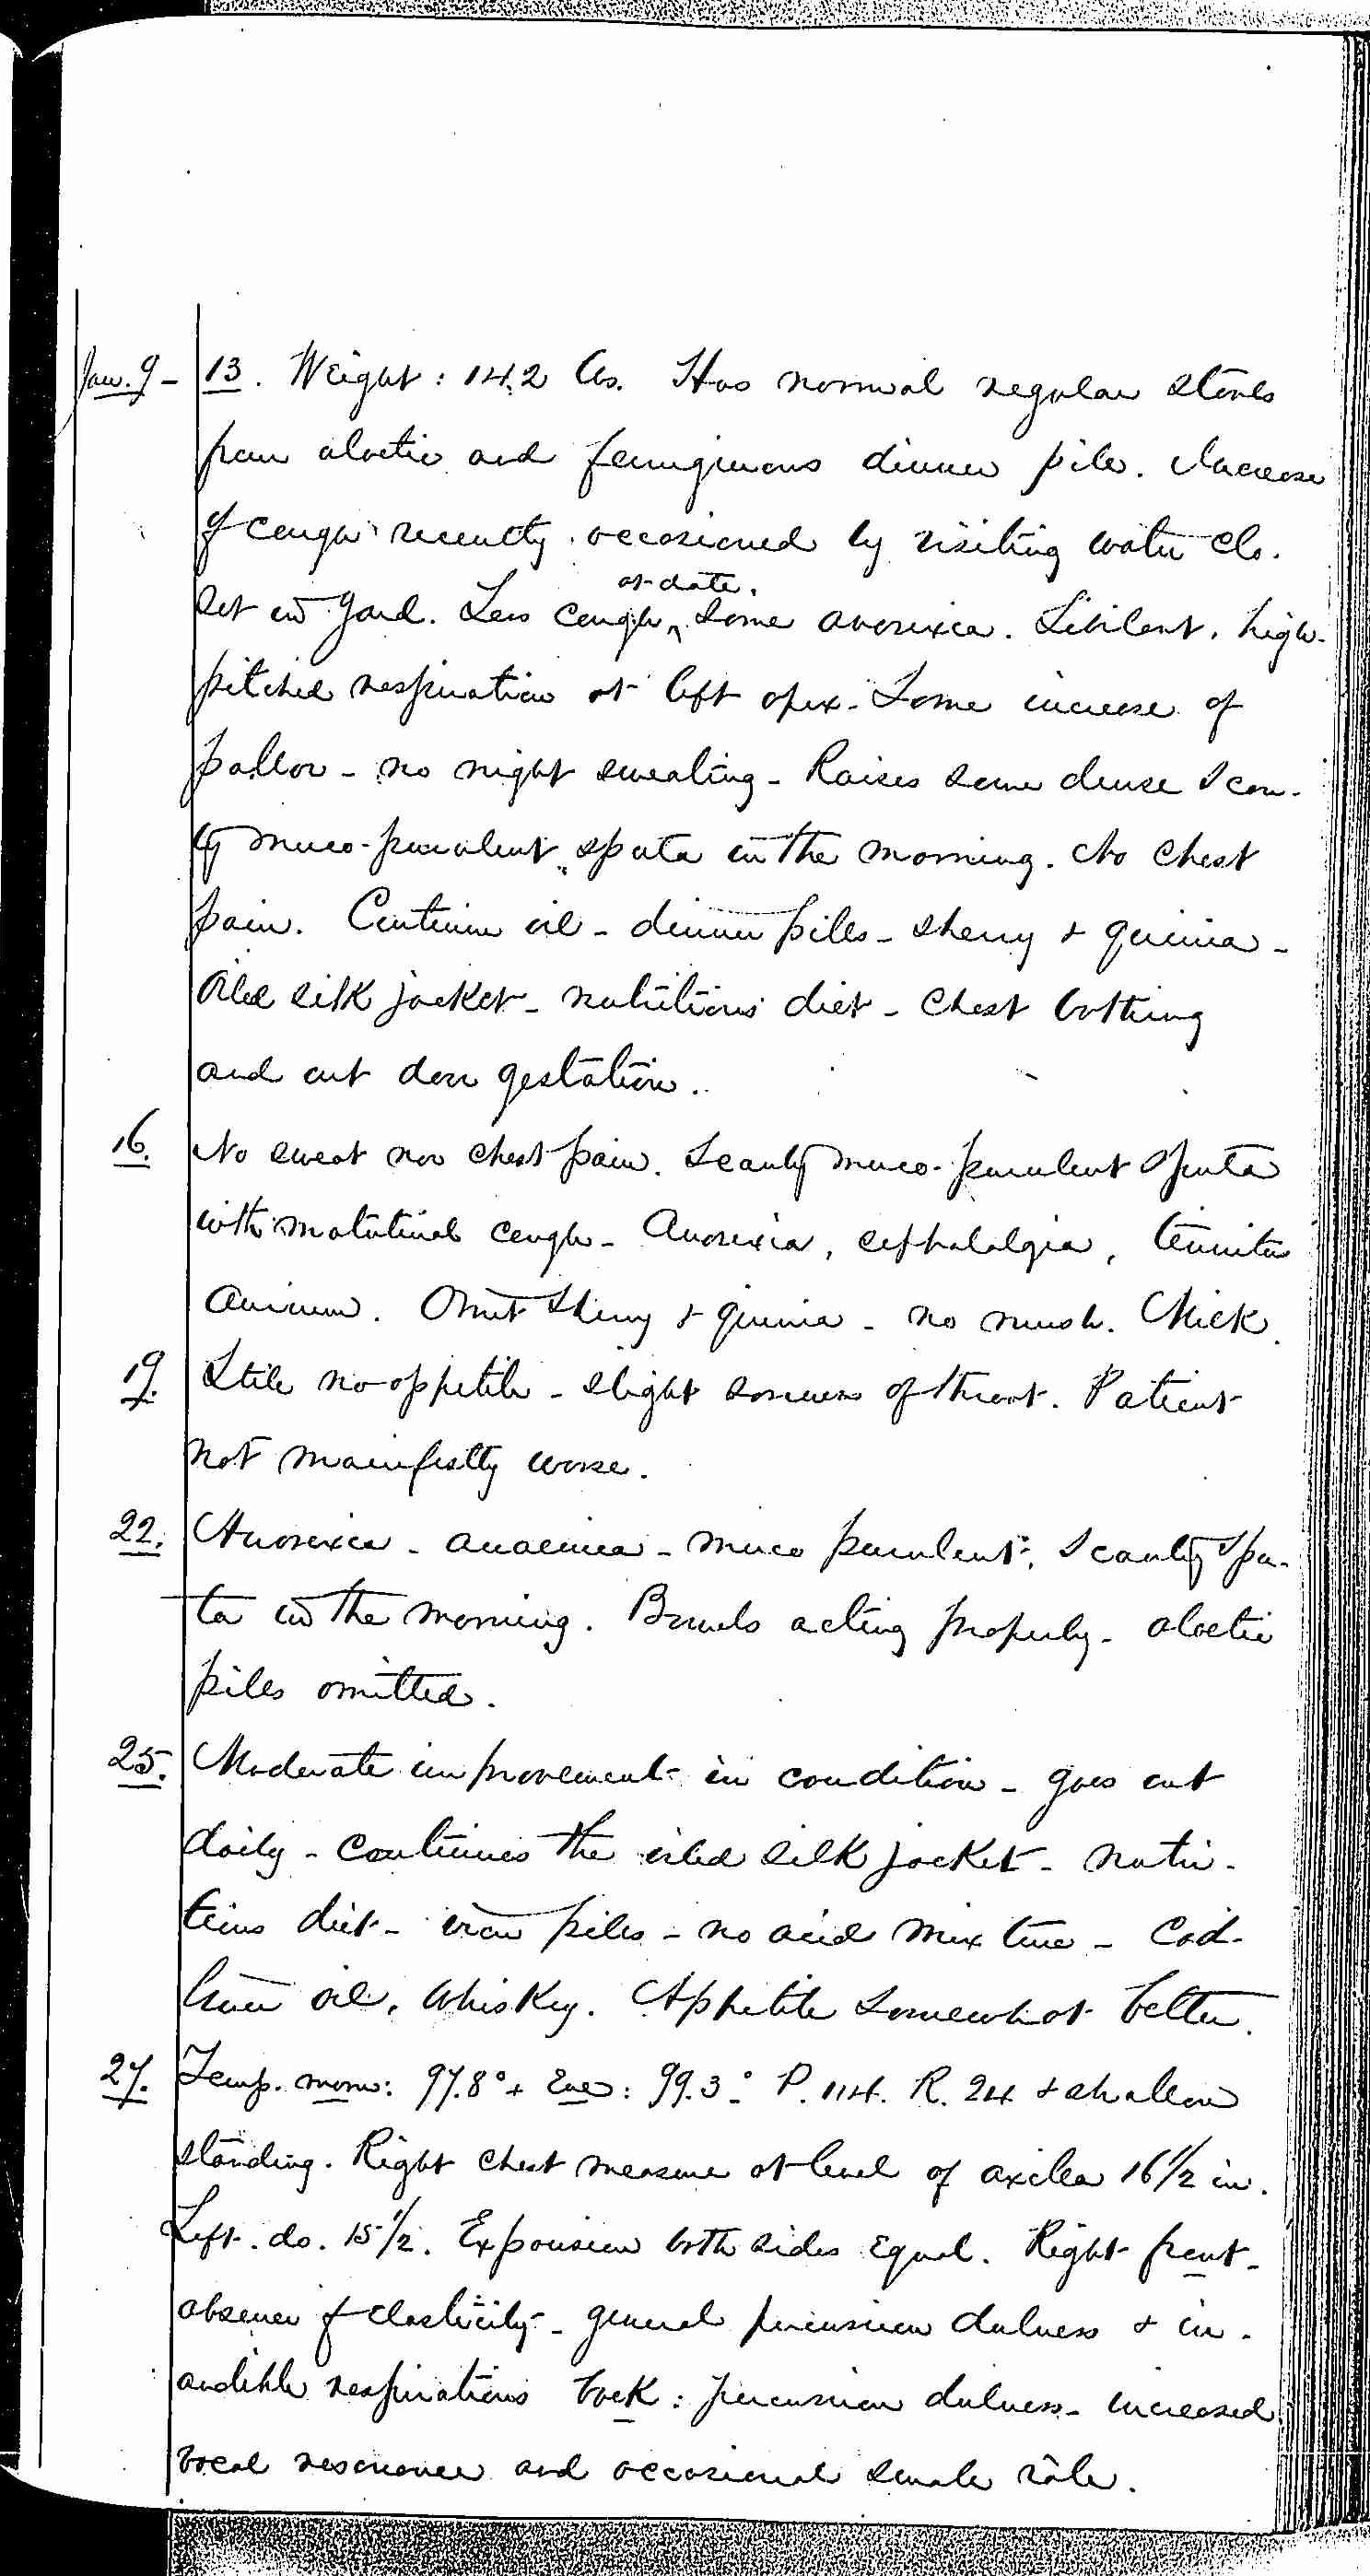 Entry for Peter C. Cheeks (page 5 of 16) in the log Hospital Tickets and Case Papers - Naval Hospital - Washington, D.C. - 1868-69